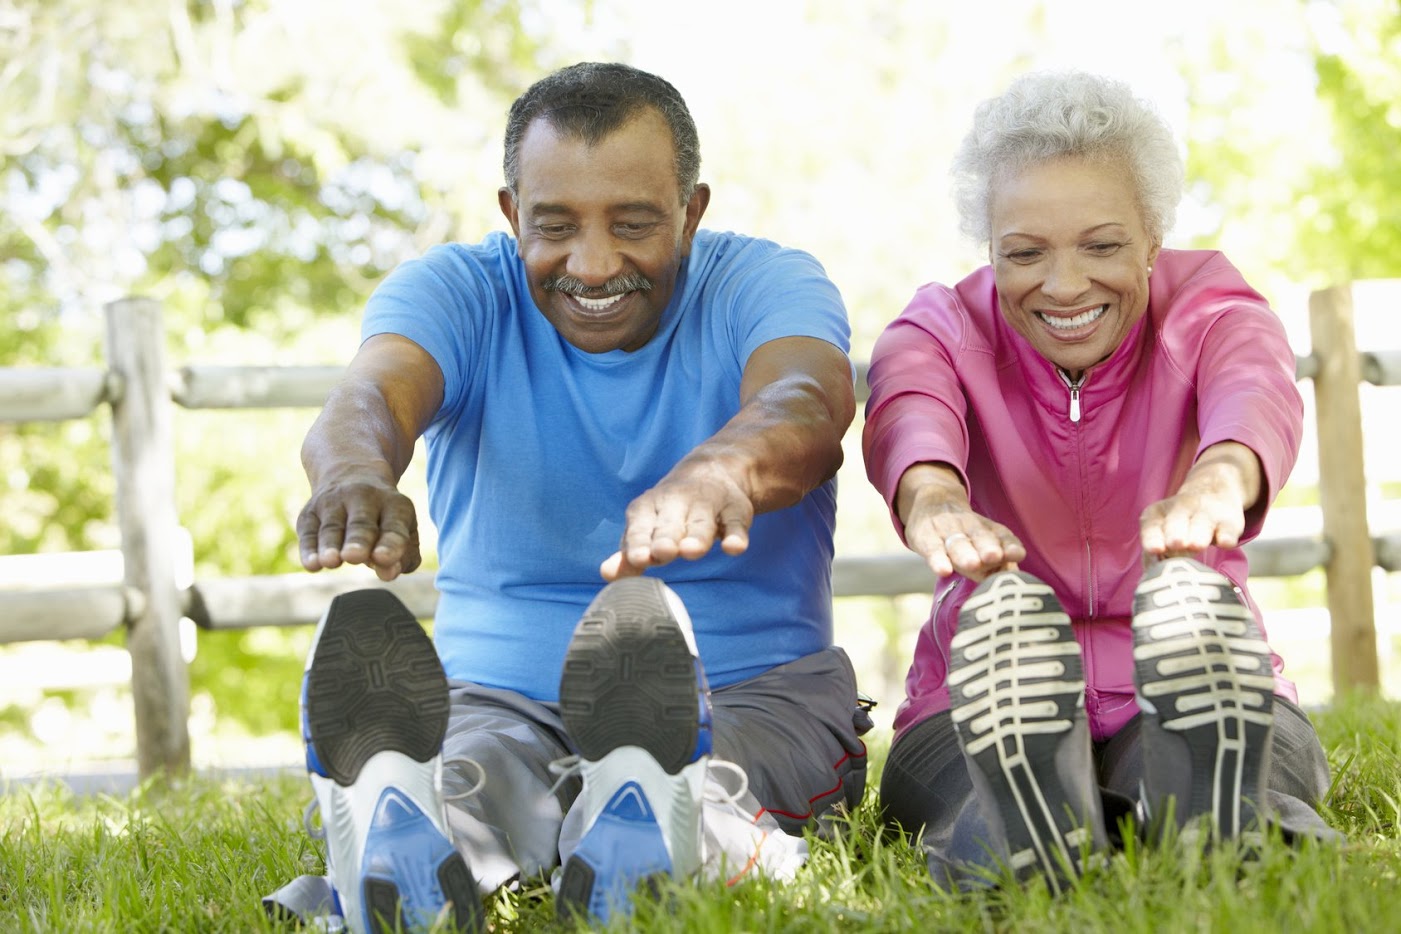 Are your parents or grandparents want to continue to be active and flexible?